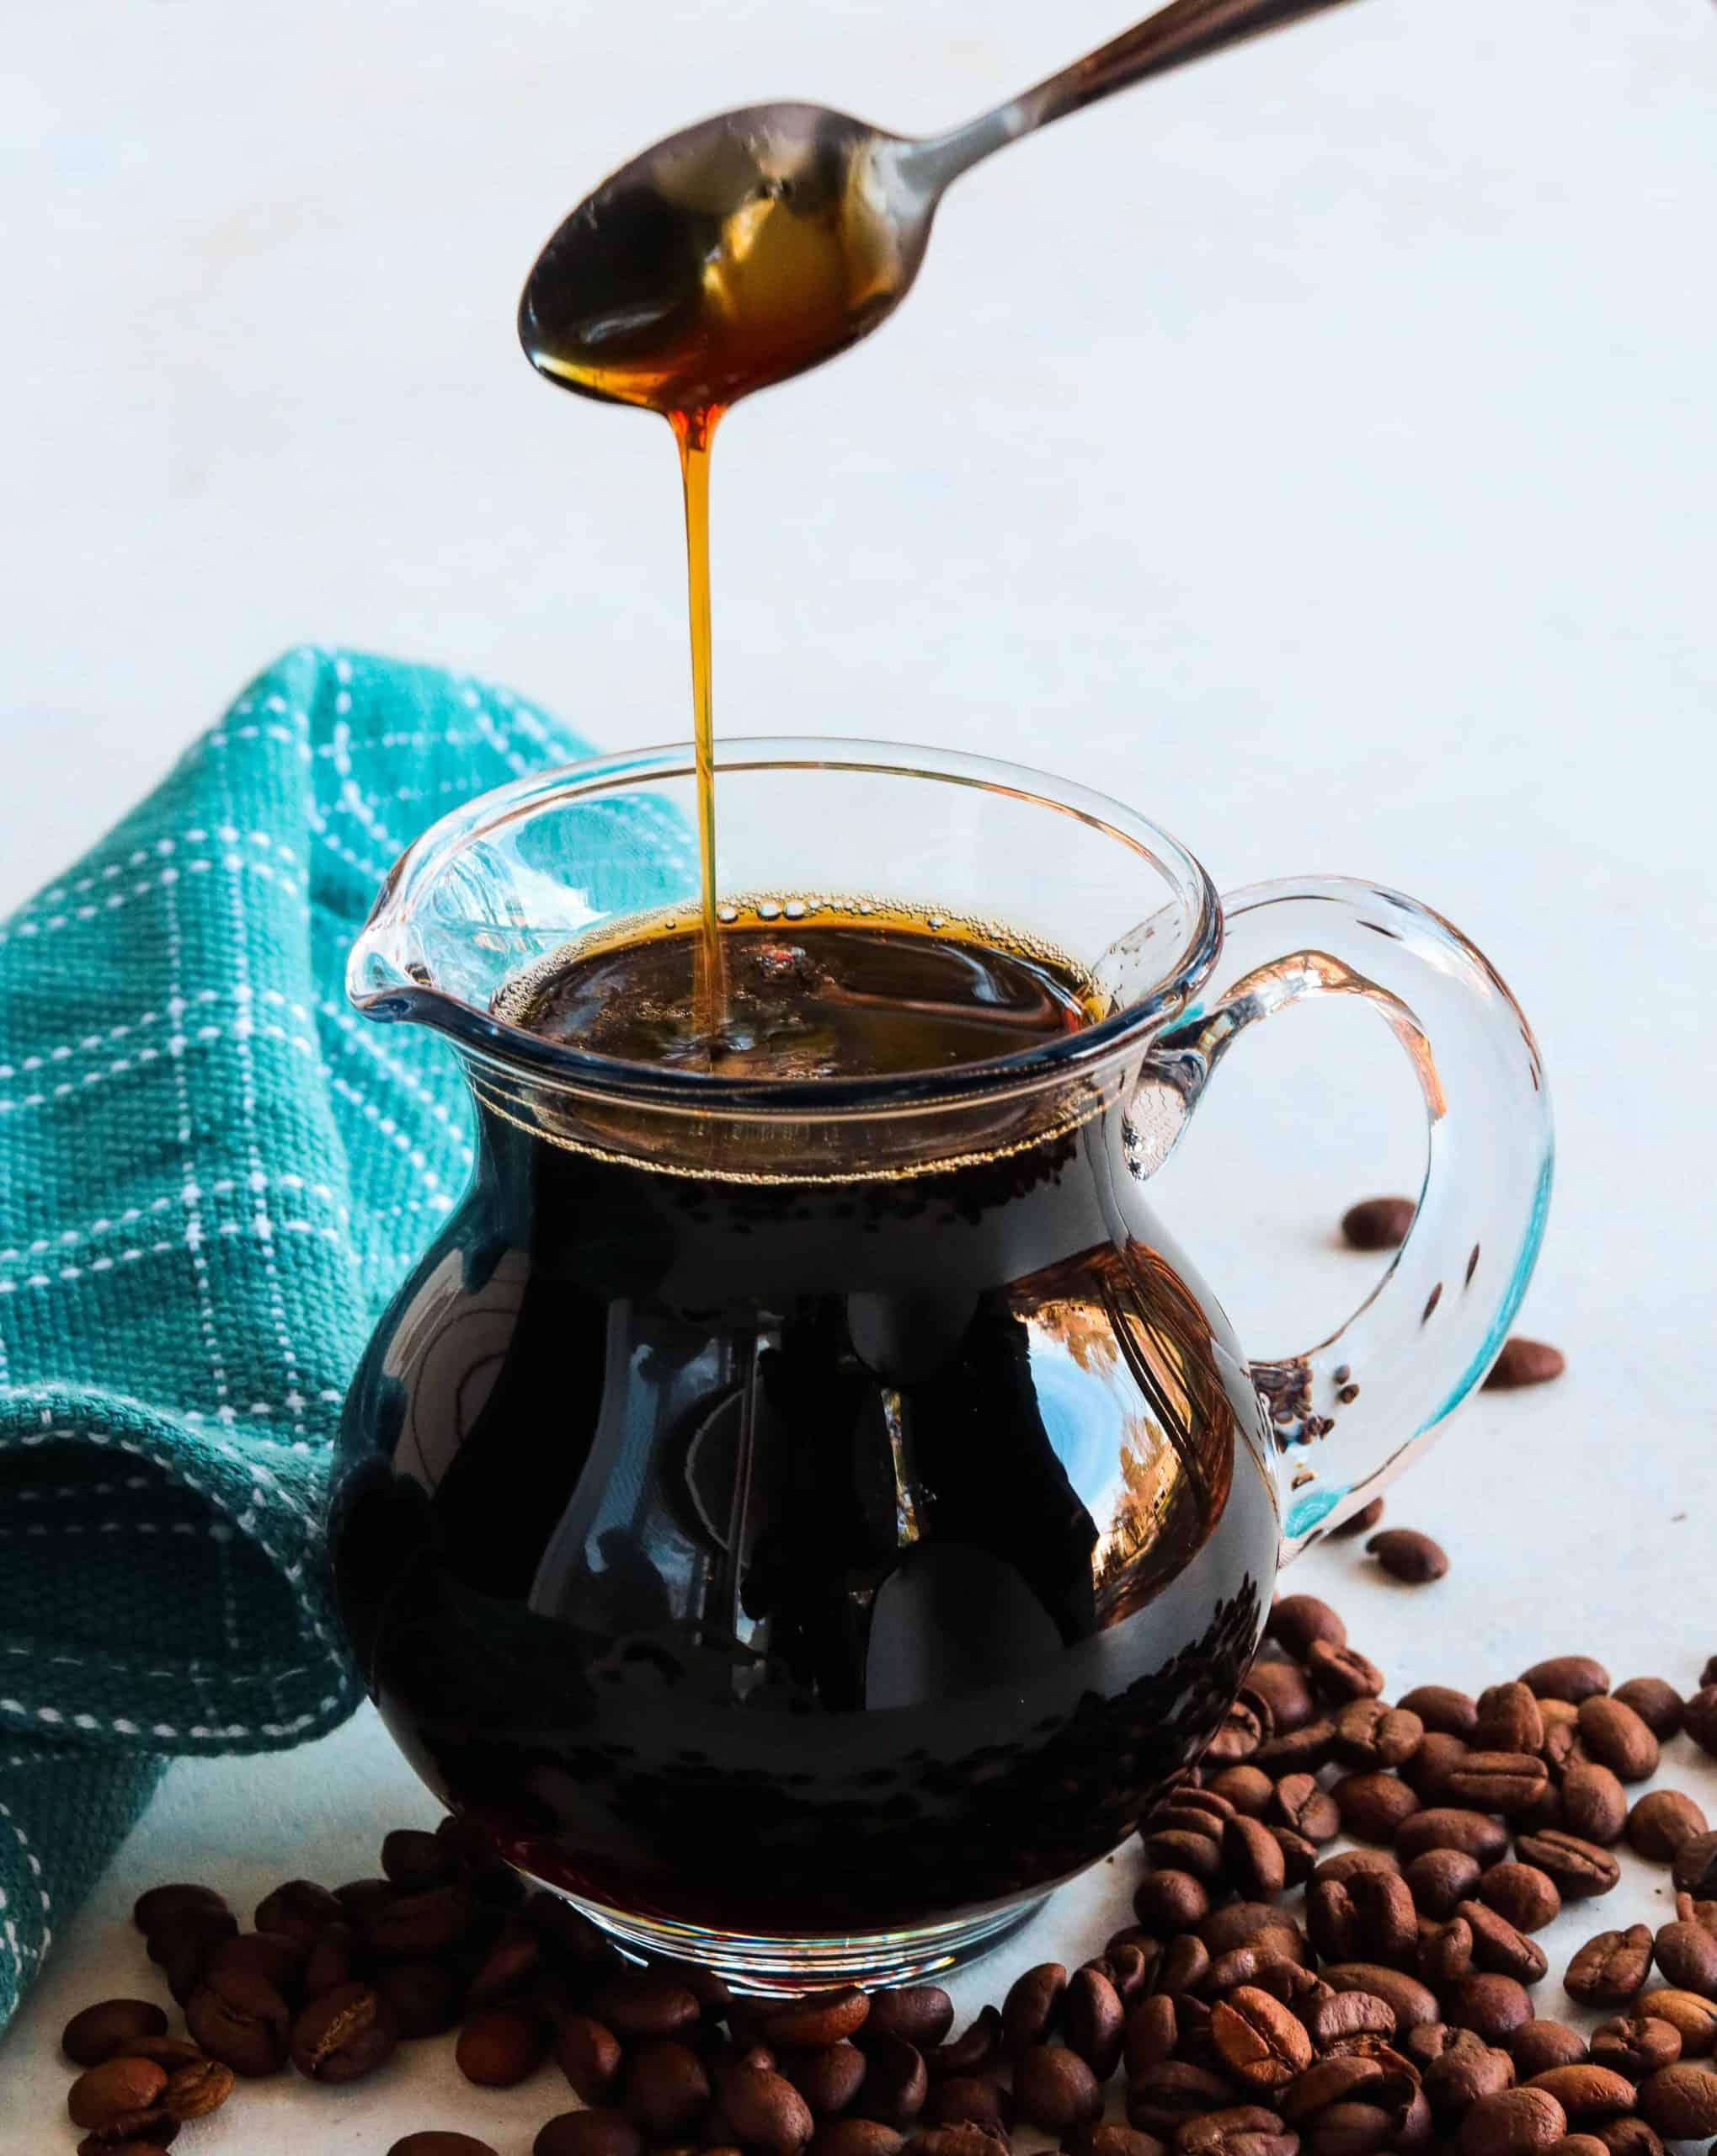 How to Use Coffee Syrup at Home